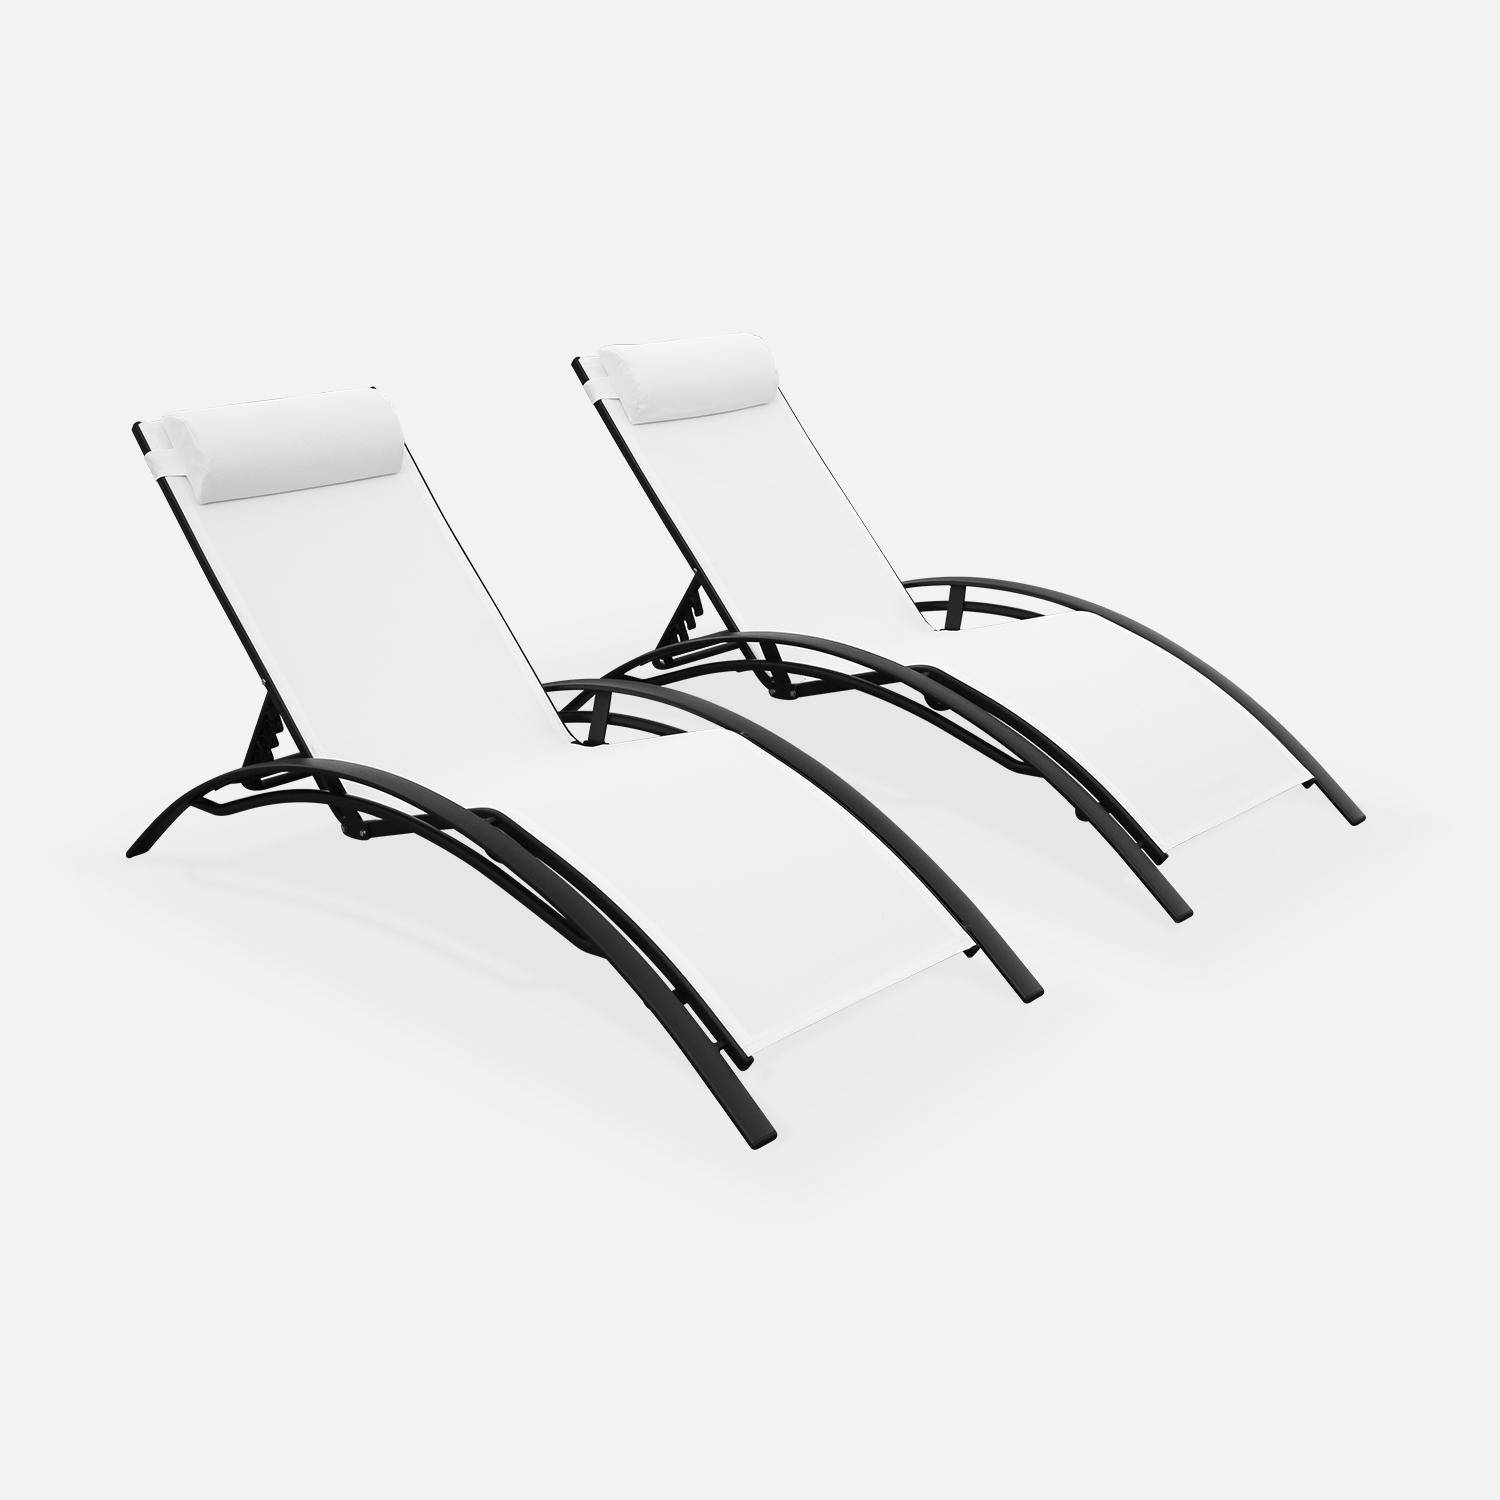 Pair of aluminium and textilene sun loungers, 4 reclining positions, headrest included, stackable - Louisa - Anthracite frame, White textilene,sweeek,Photo1